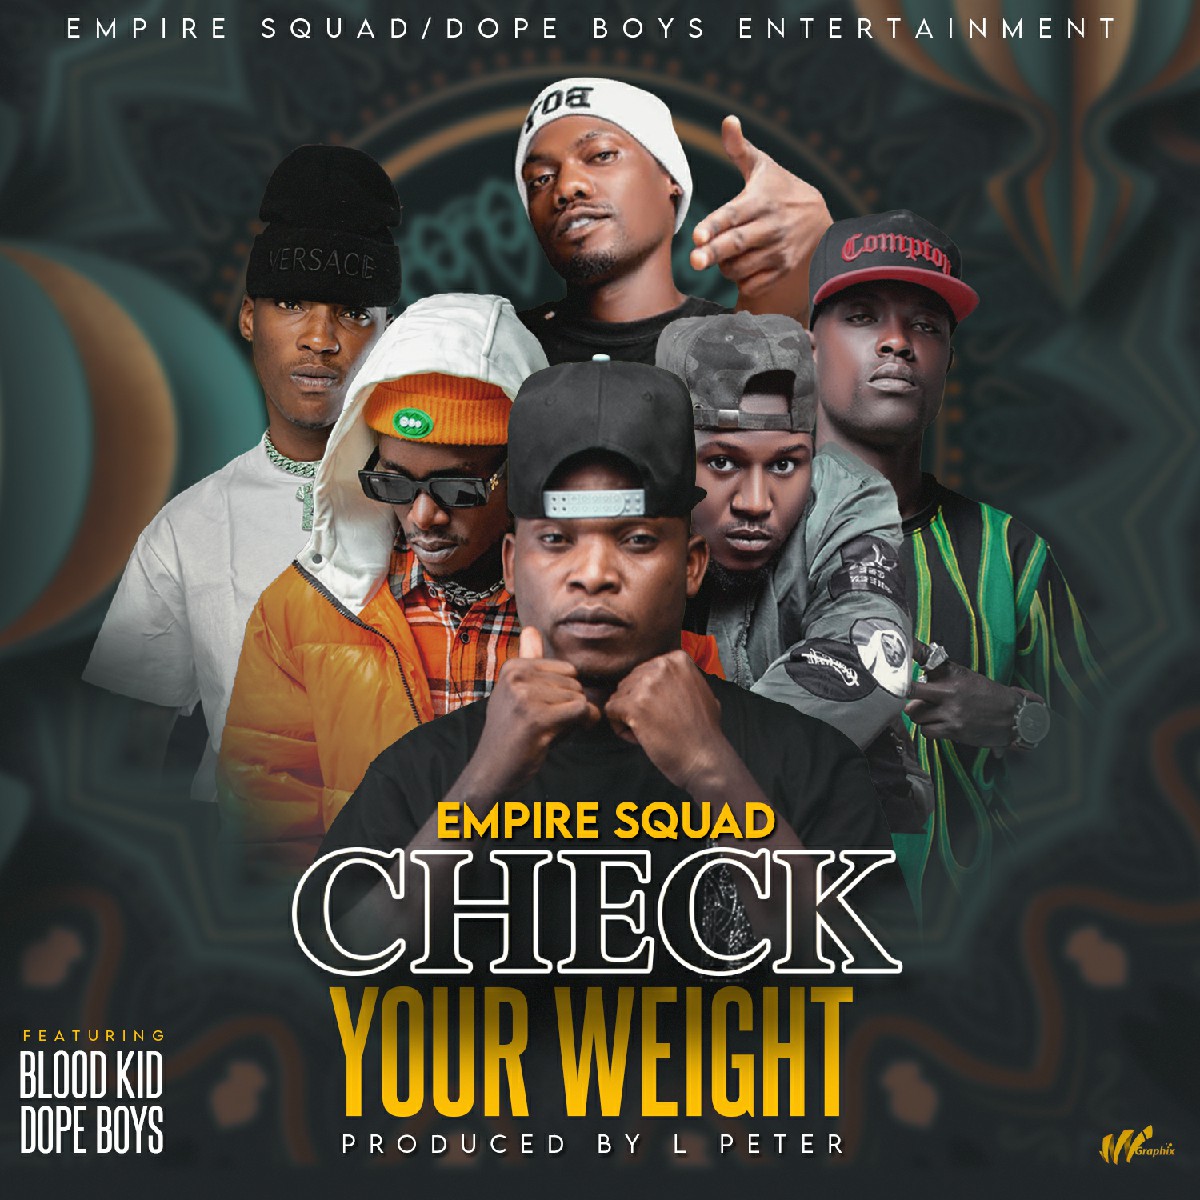 Empire Squad ft. Dope Boys & Blood Kid - Check Your Weight